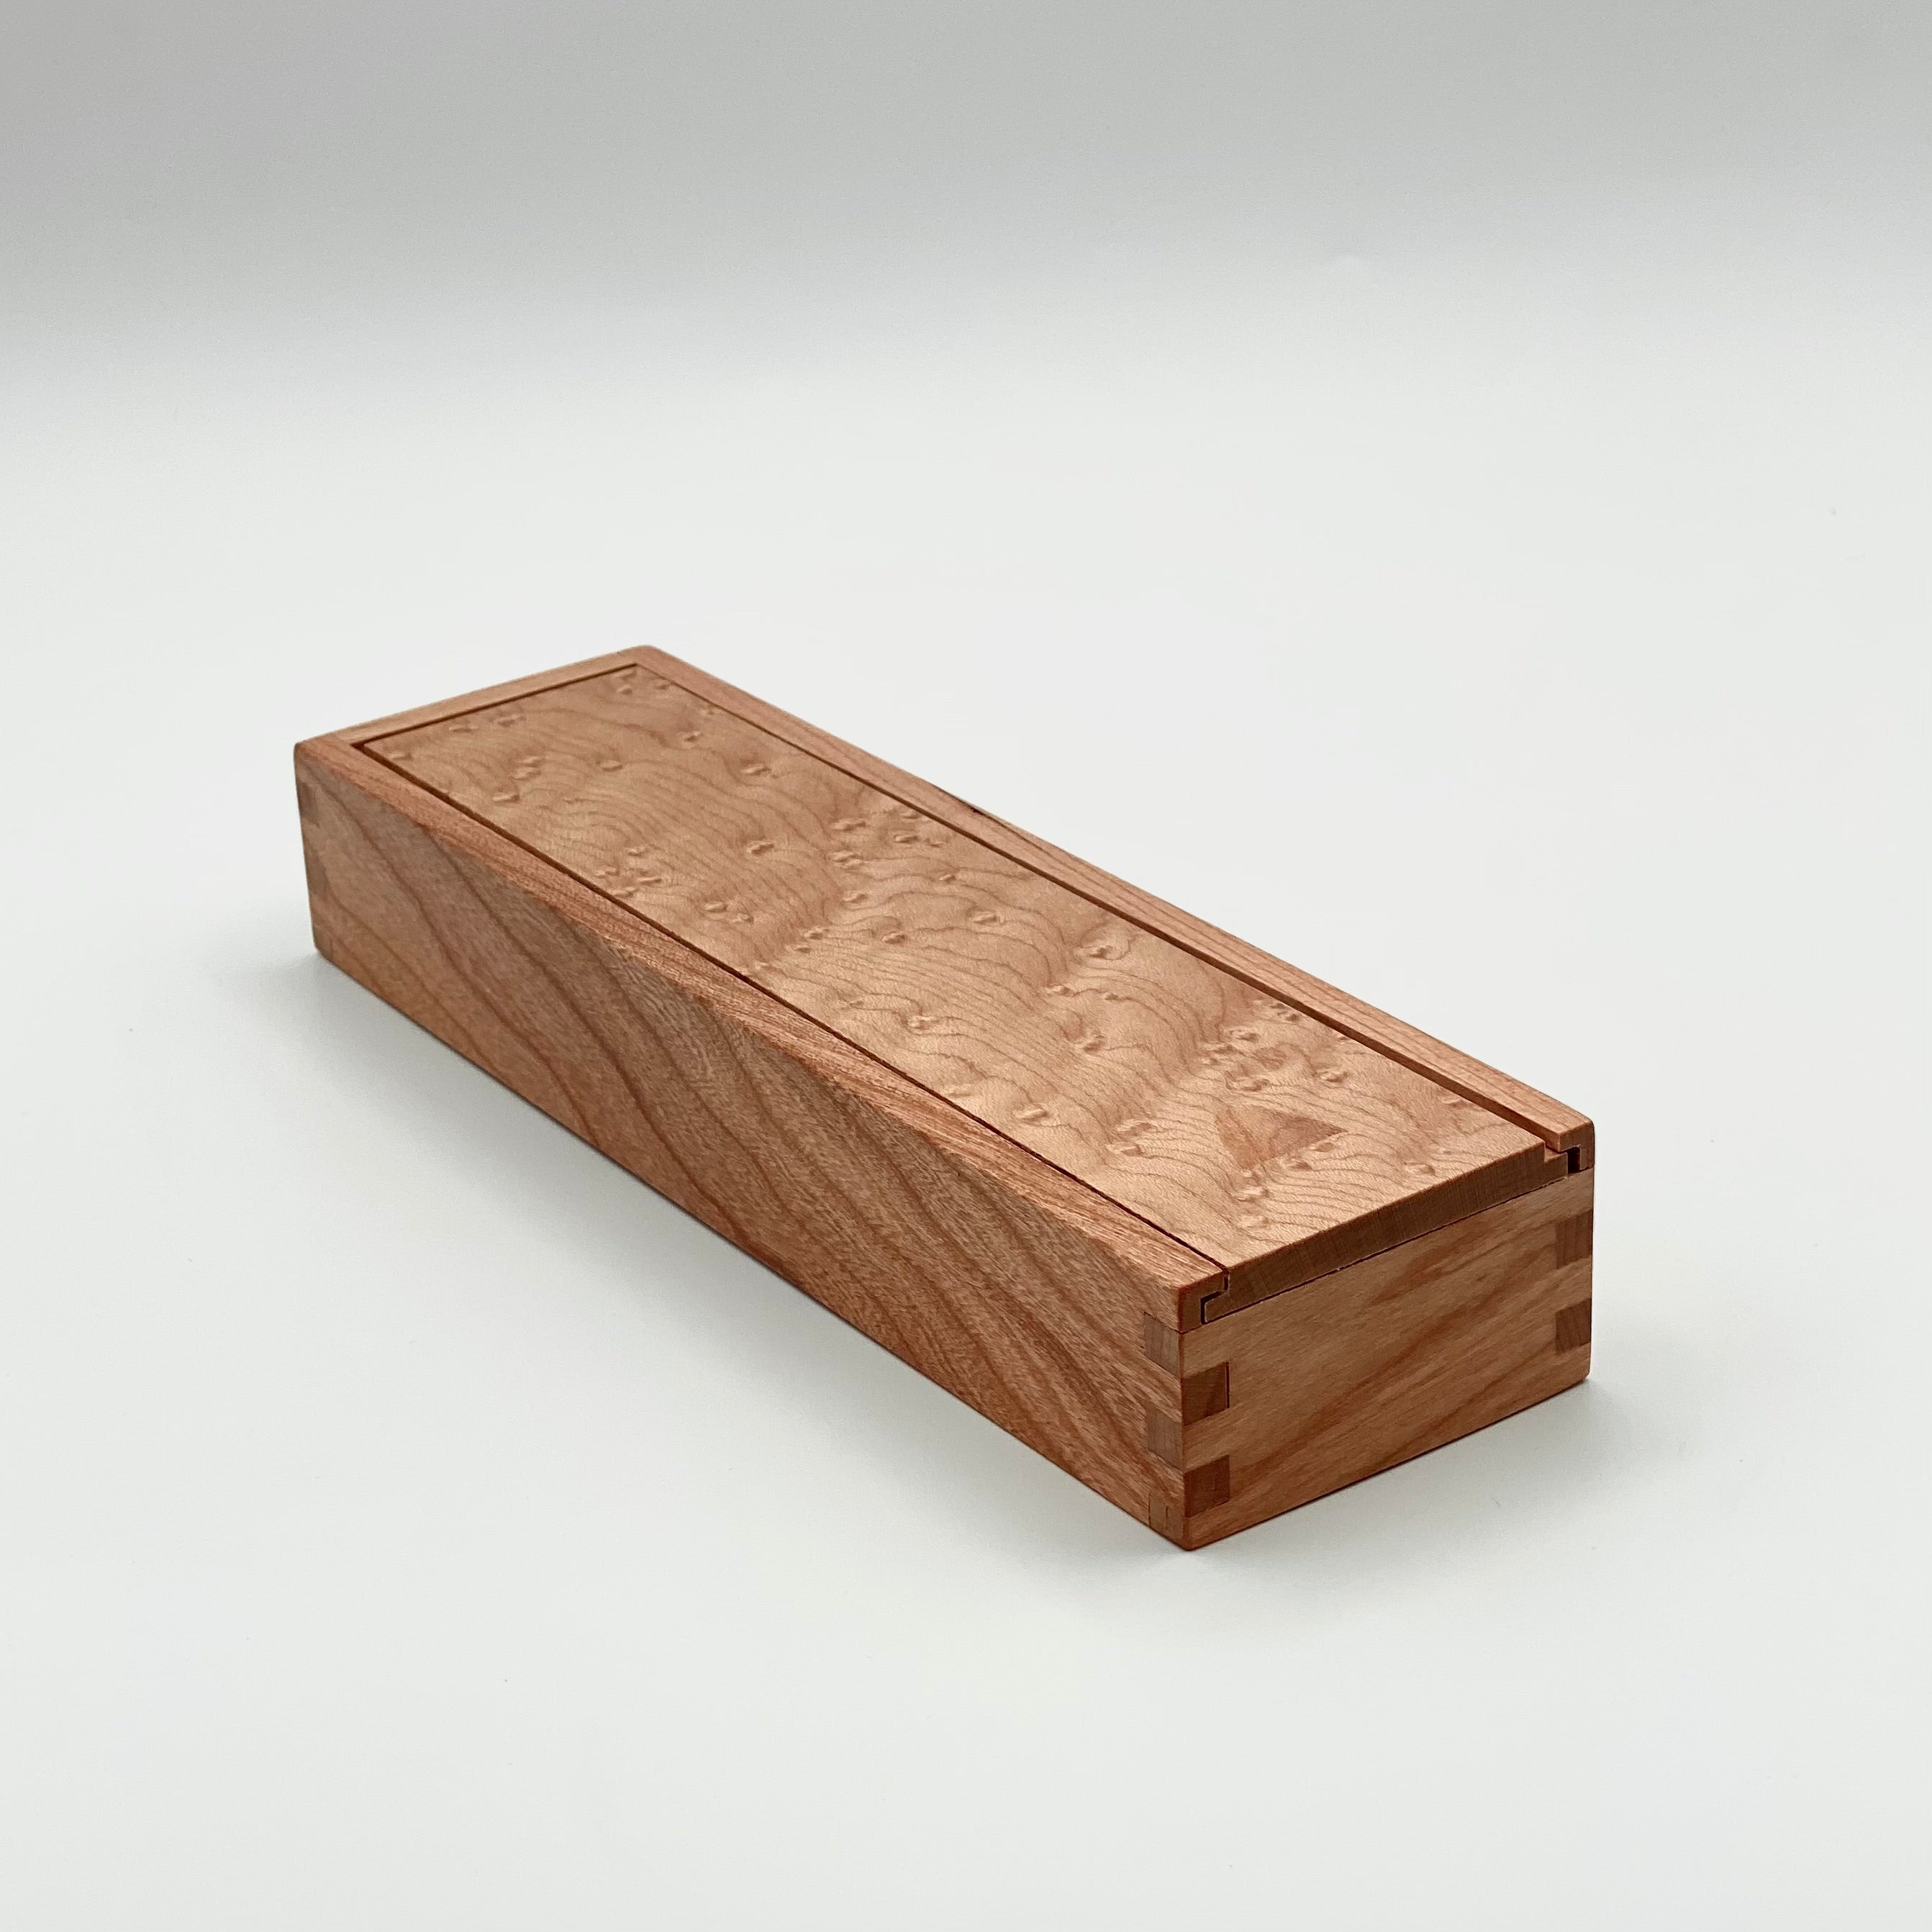 Pencil Box by Brent Rourke